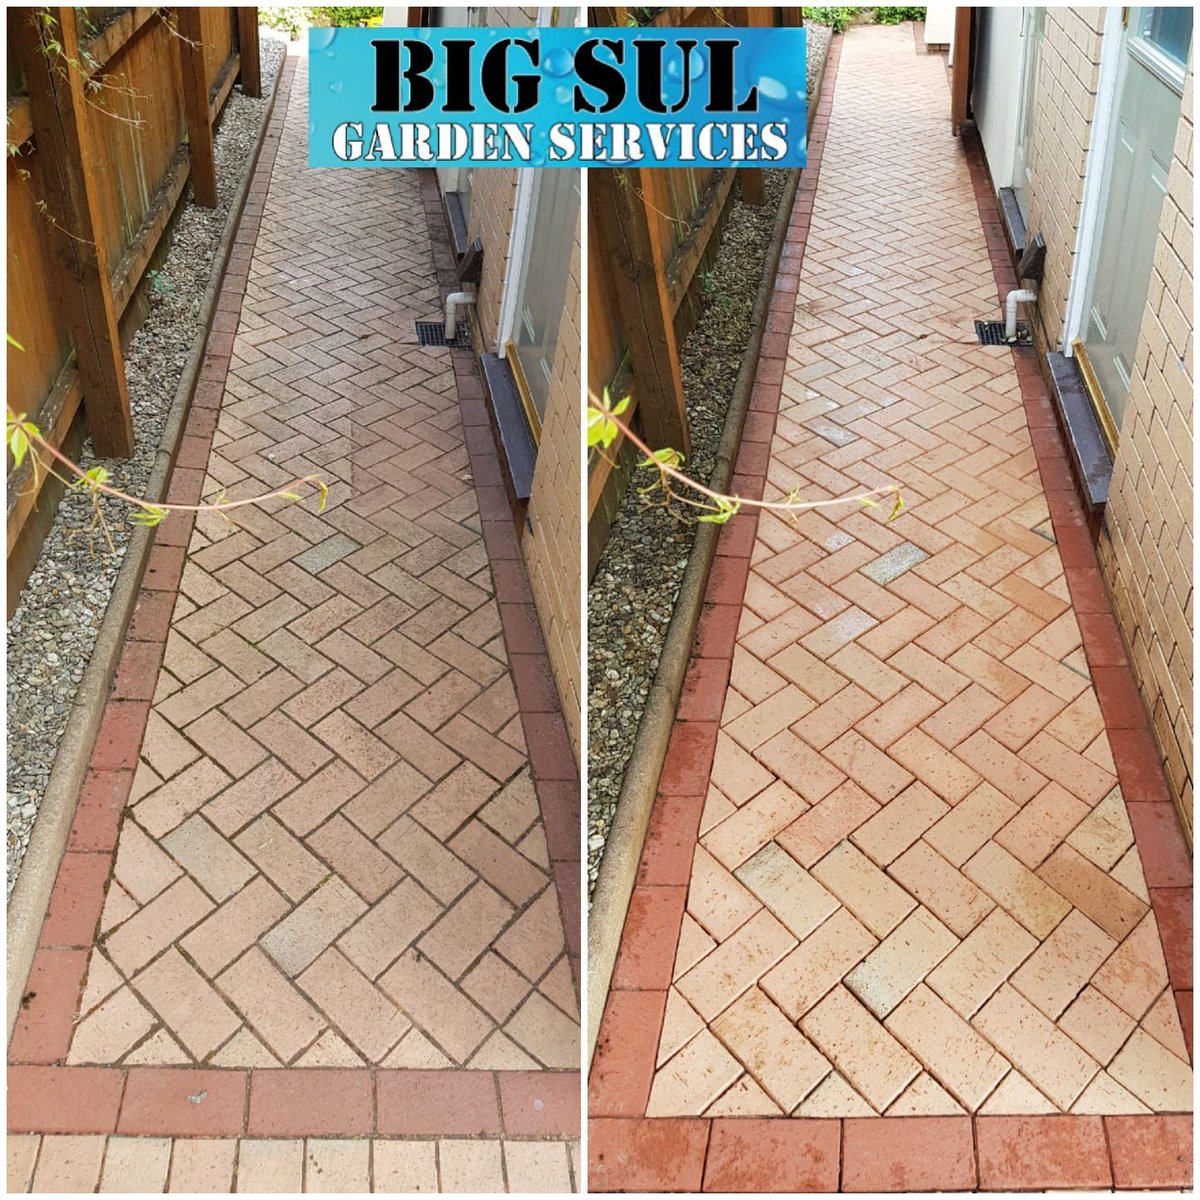 Walkway cleaned for our customer using our pressure washing service. Give us a shout for a quote